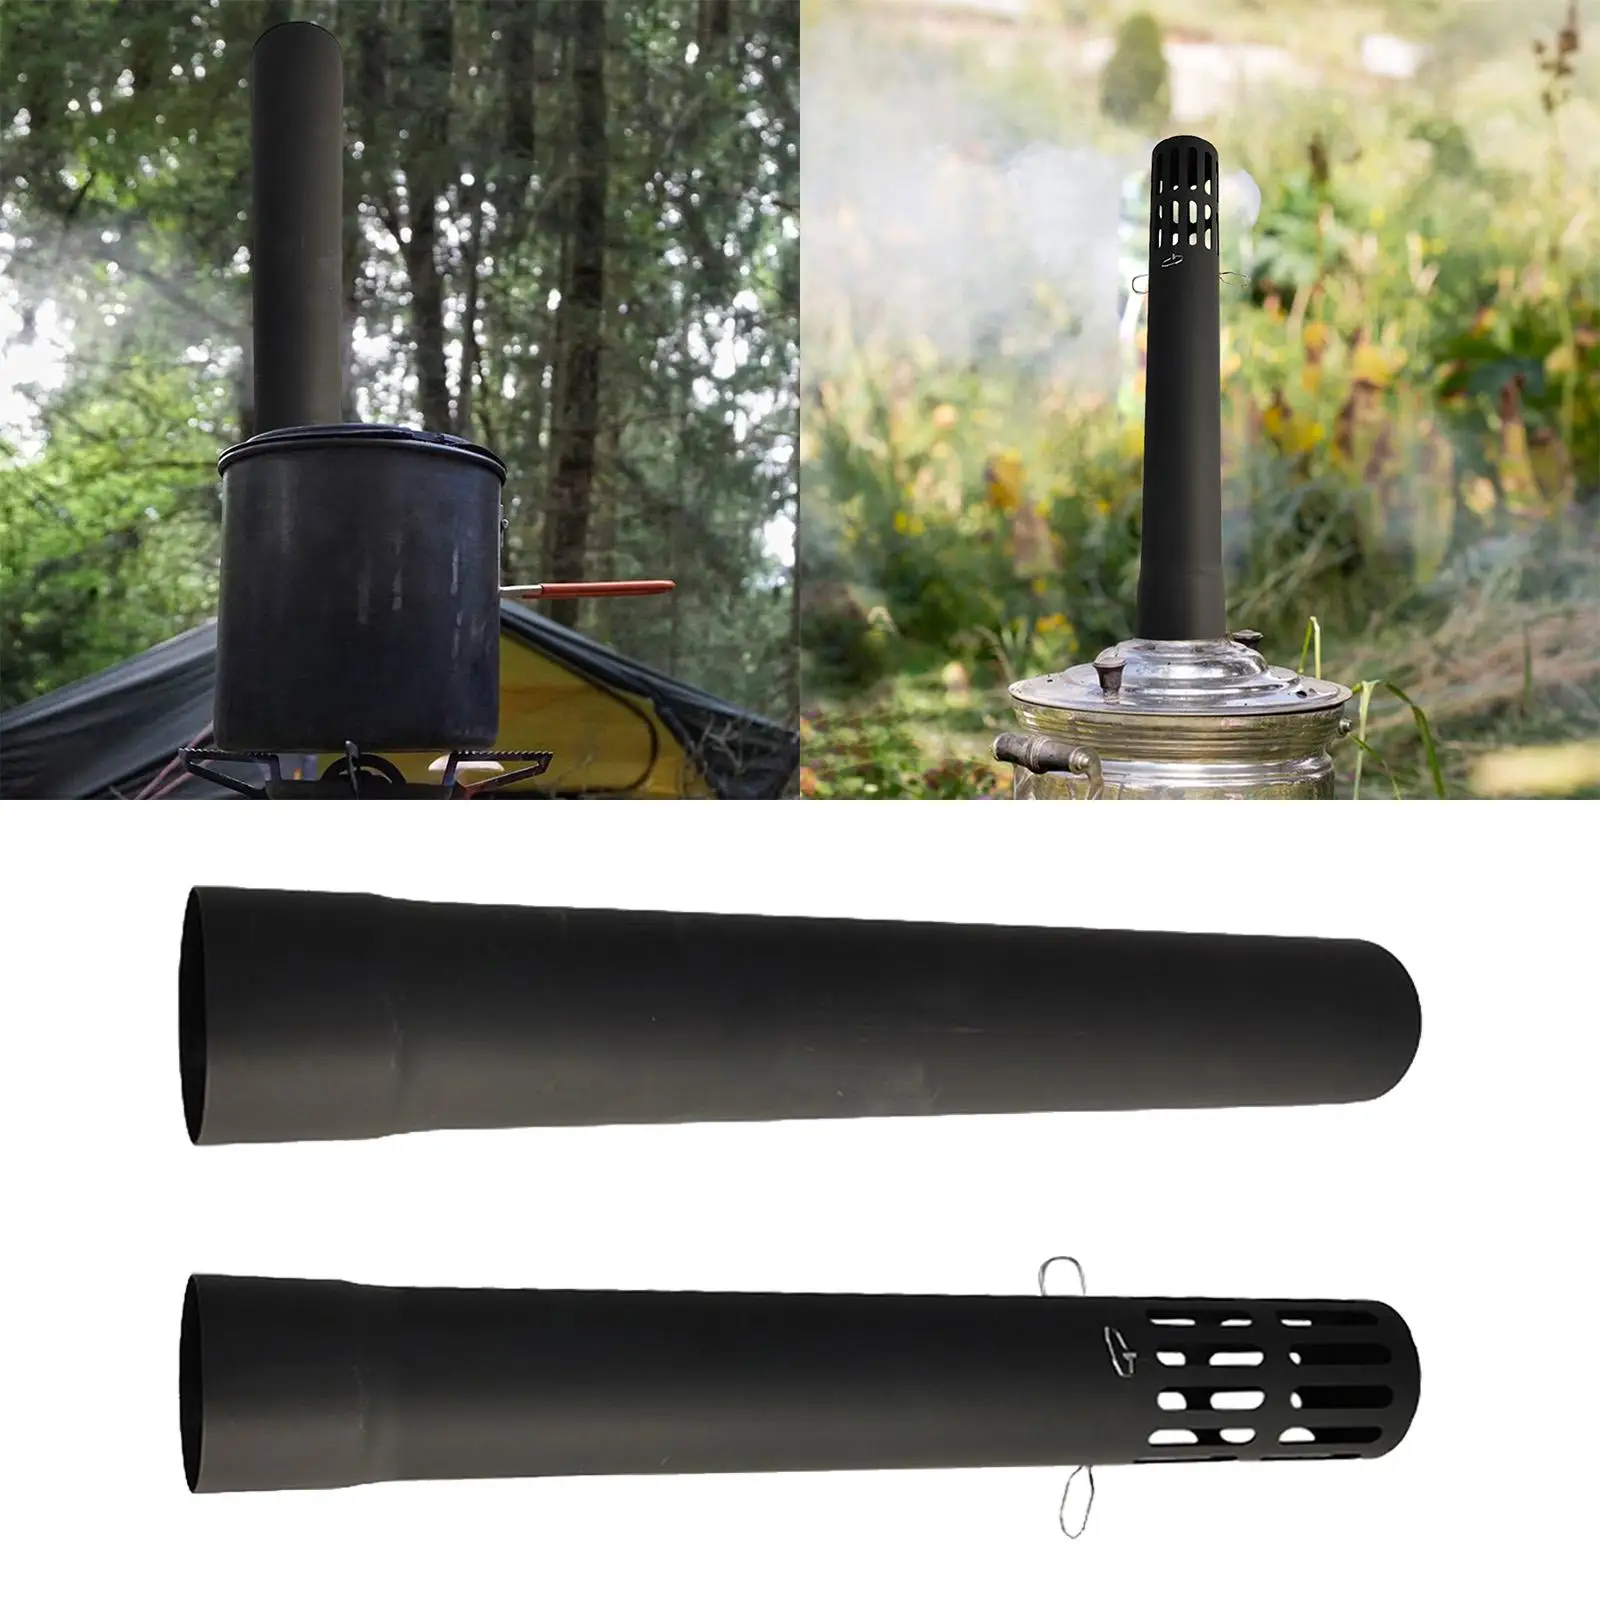 Stove Pipe Stove Accessories Fireplace Stove Chimney Pipe Flue Extension Tube for Hiking Outdoor Camping Burner Winter Heater